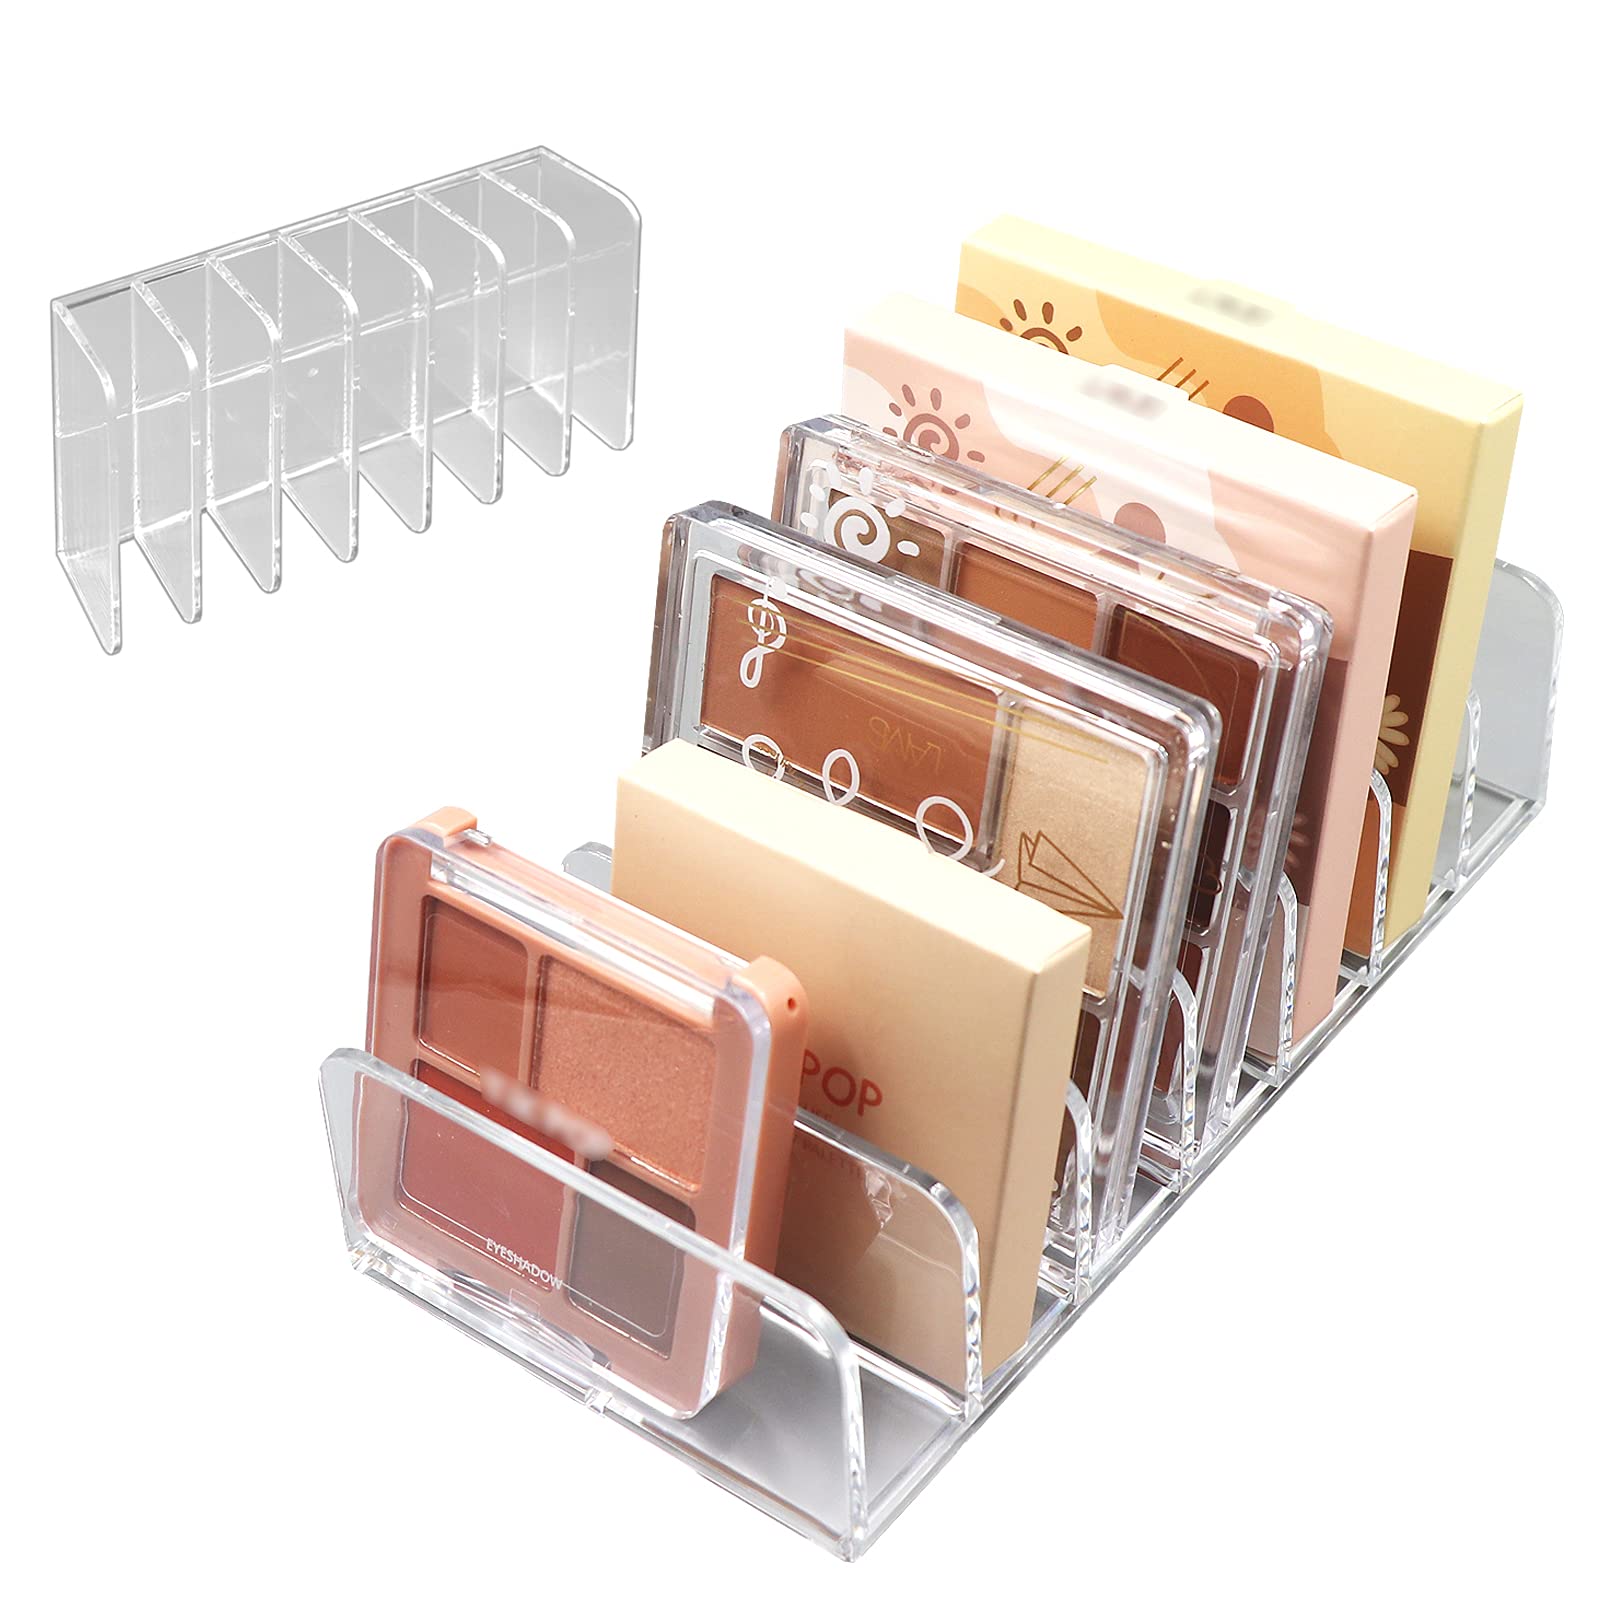 Makeup Organizer, Compact Makeup Palette Organize, for Bathroom Countertops, Vanities, Cabinets, Sleek Modern Cosmetics Storage Solution for - Eyeshadow Palettes, Contour Kits, Blush